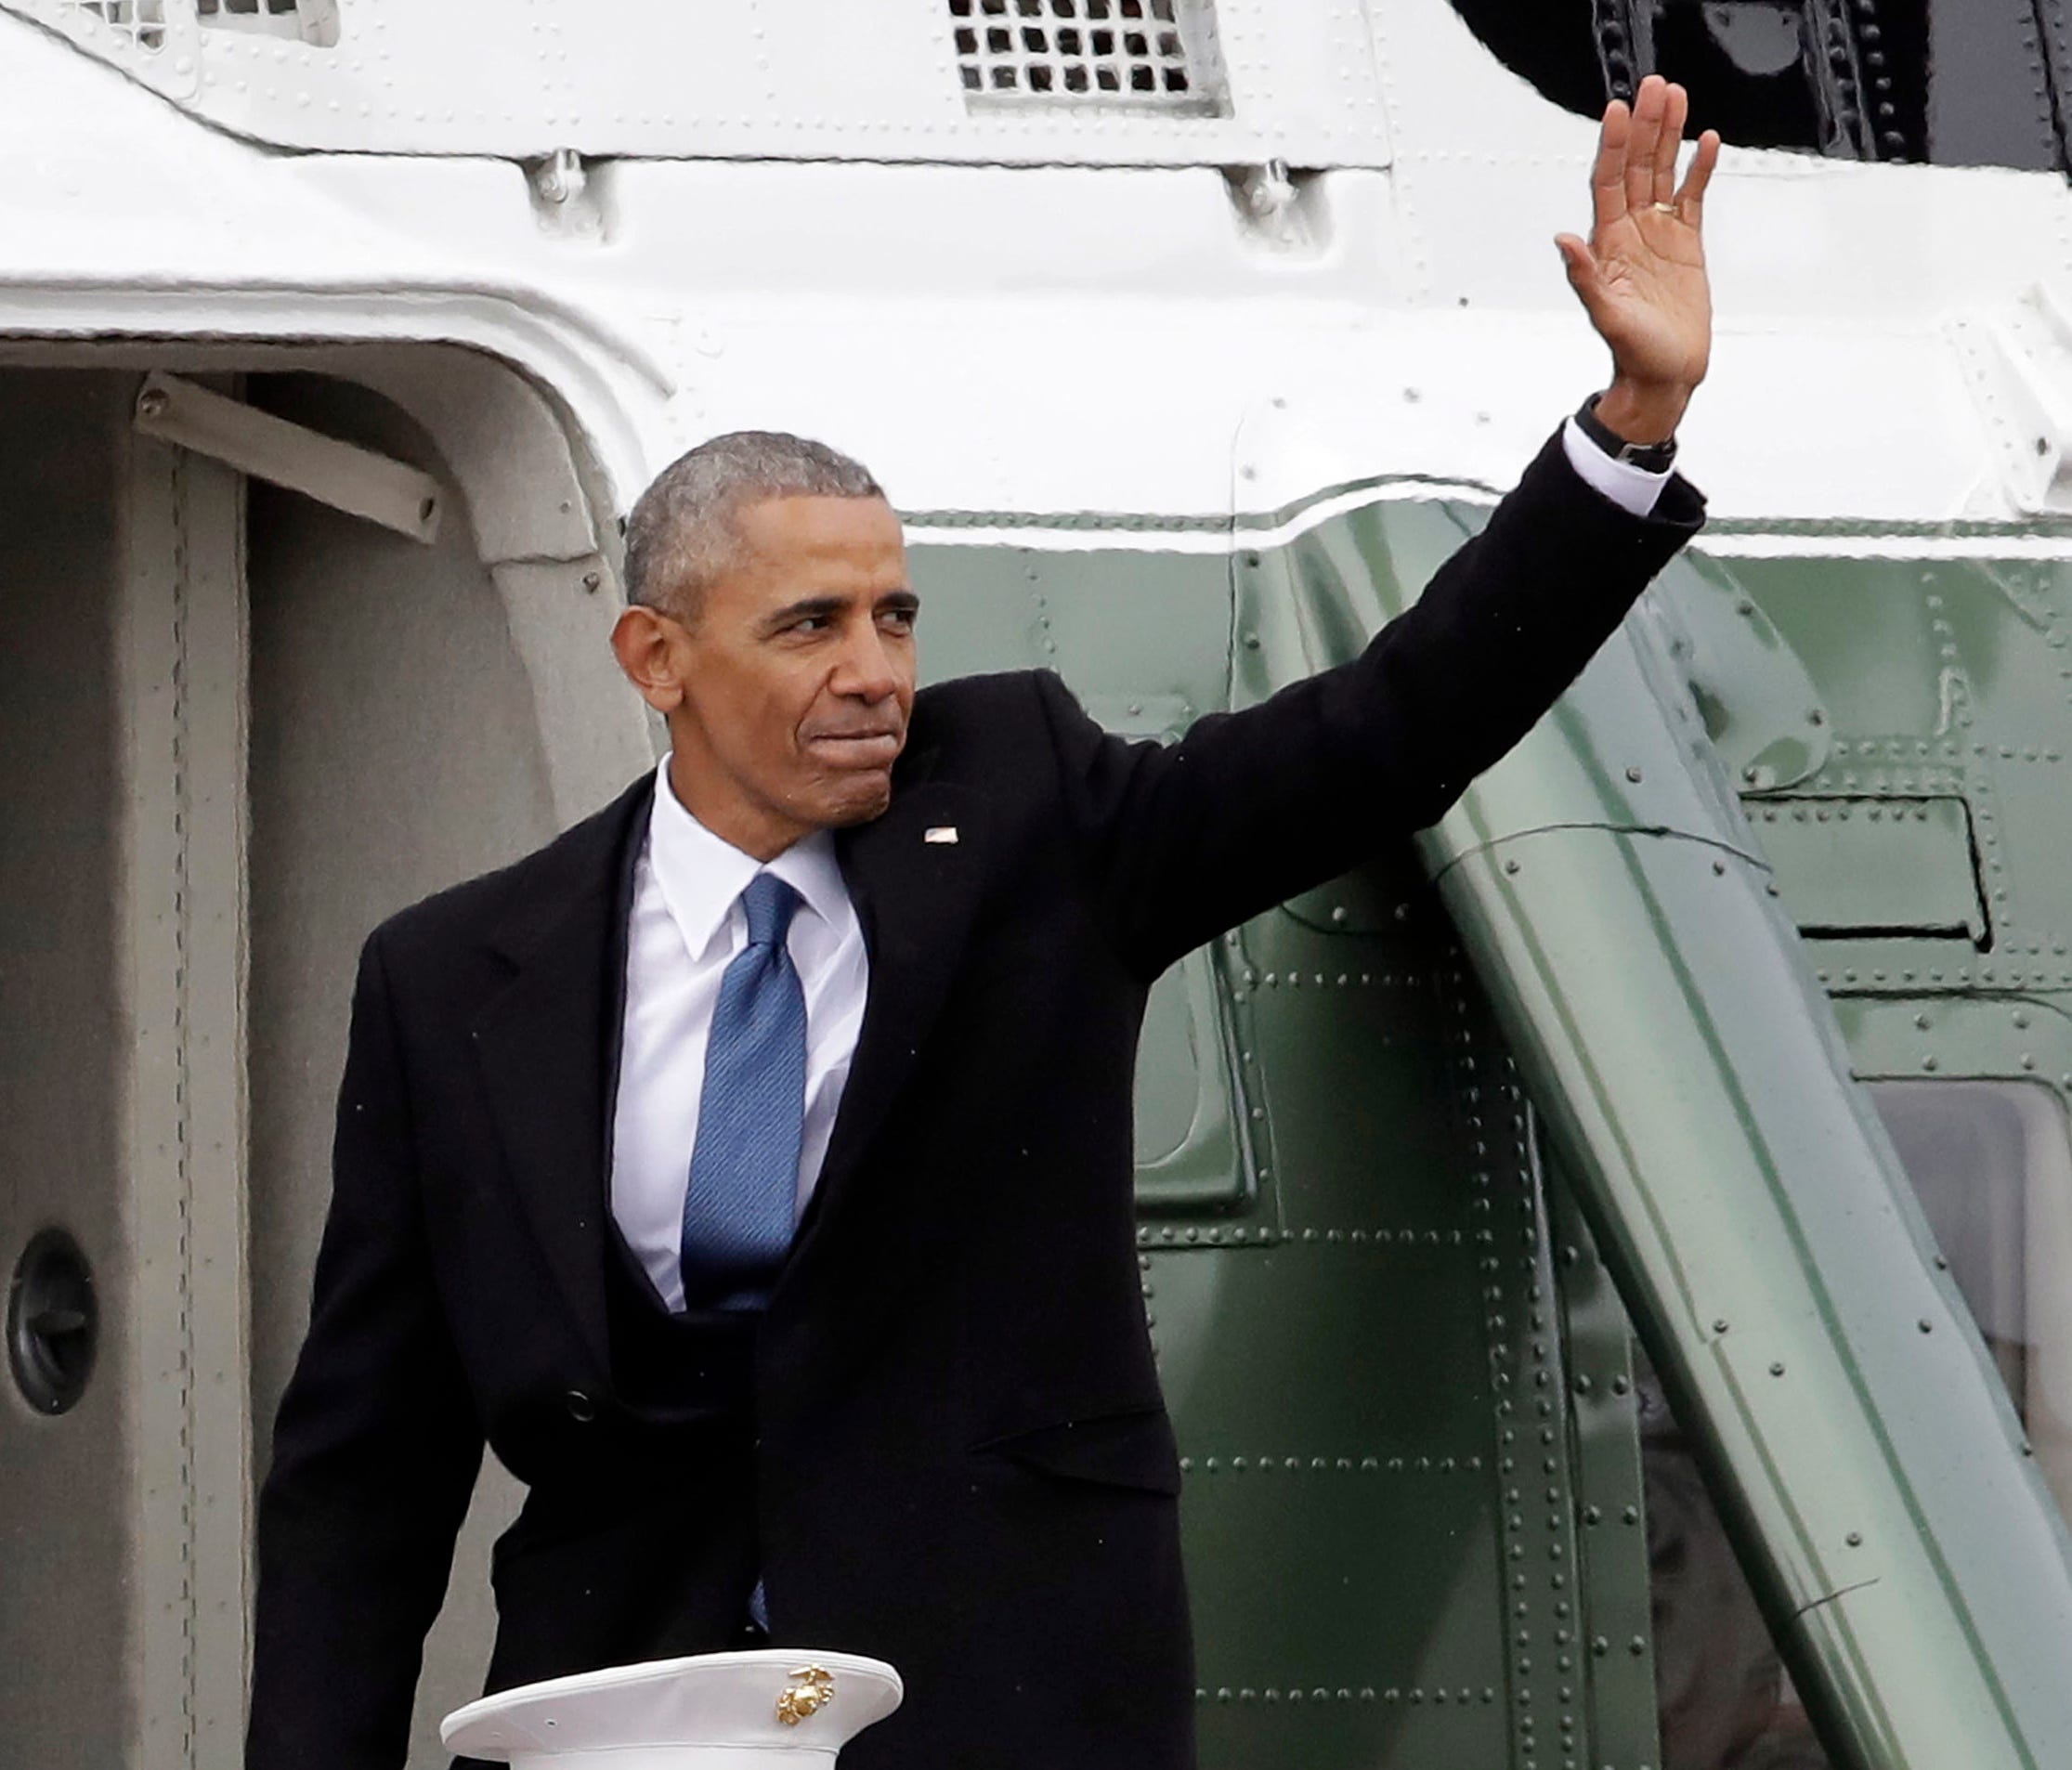 In this Jan. 20, 2017, file photo, former President Barack Obama waves as he boards a Marine helicopter during a departure ceremony on the East Front of the U.S. Capitol in Washington after President Trump was inaugurated.